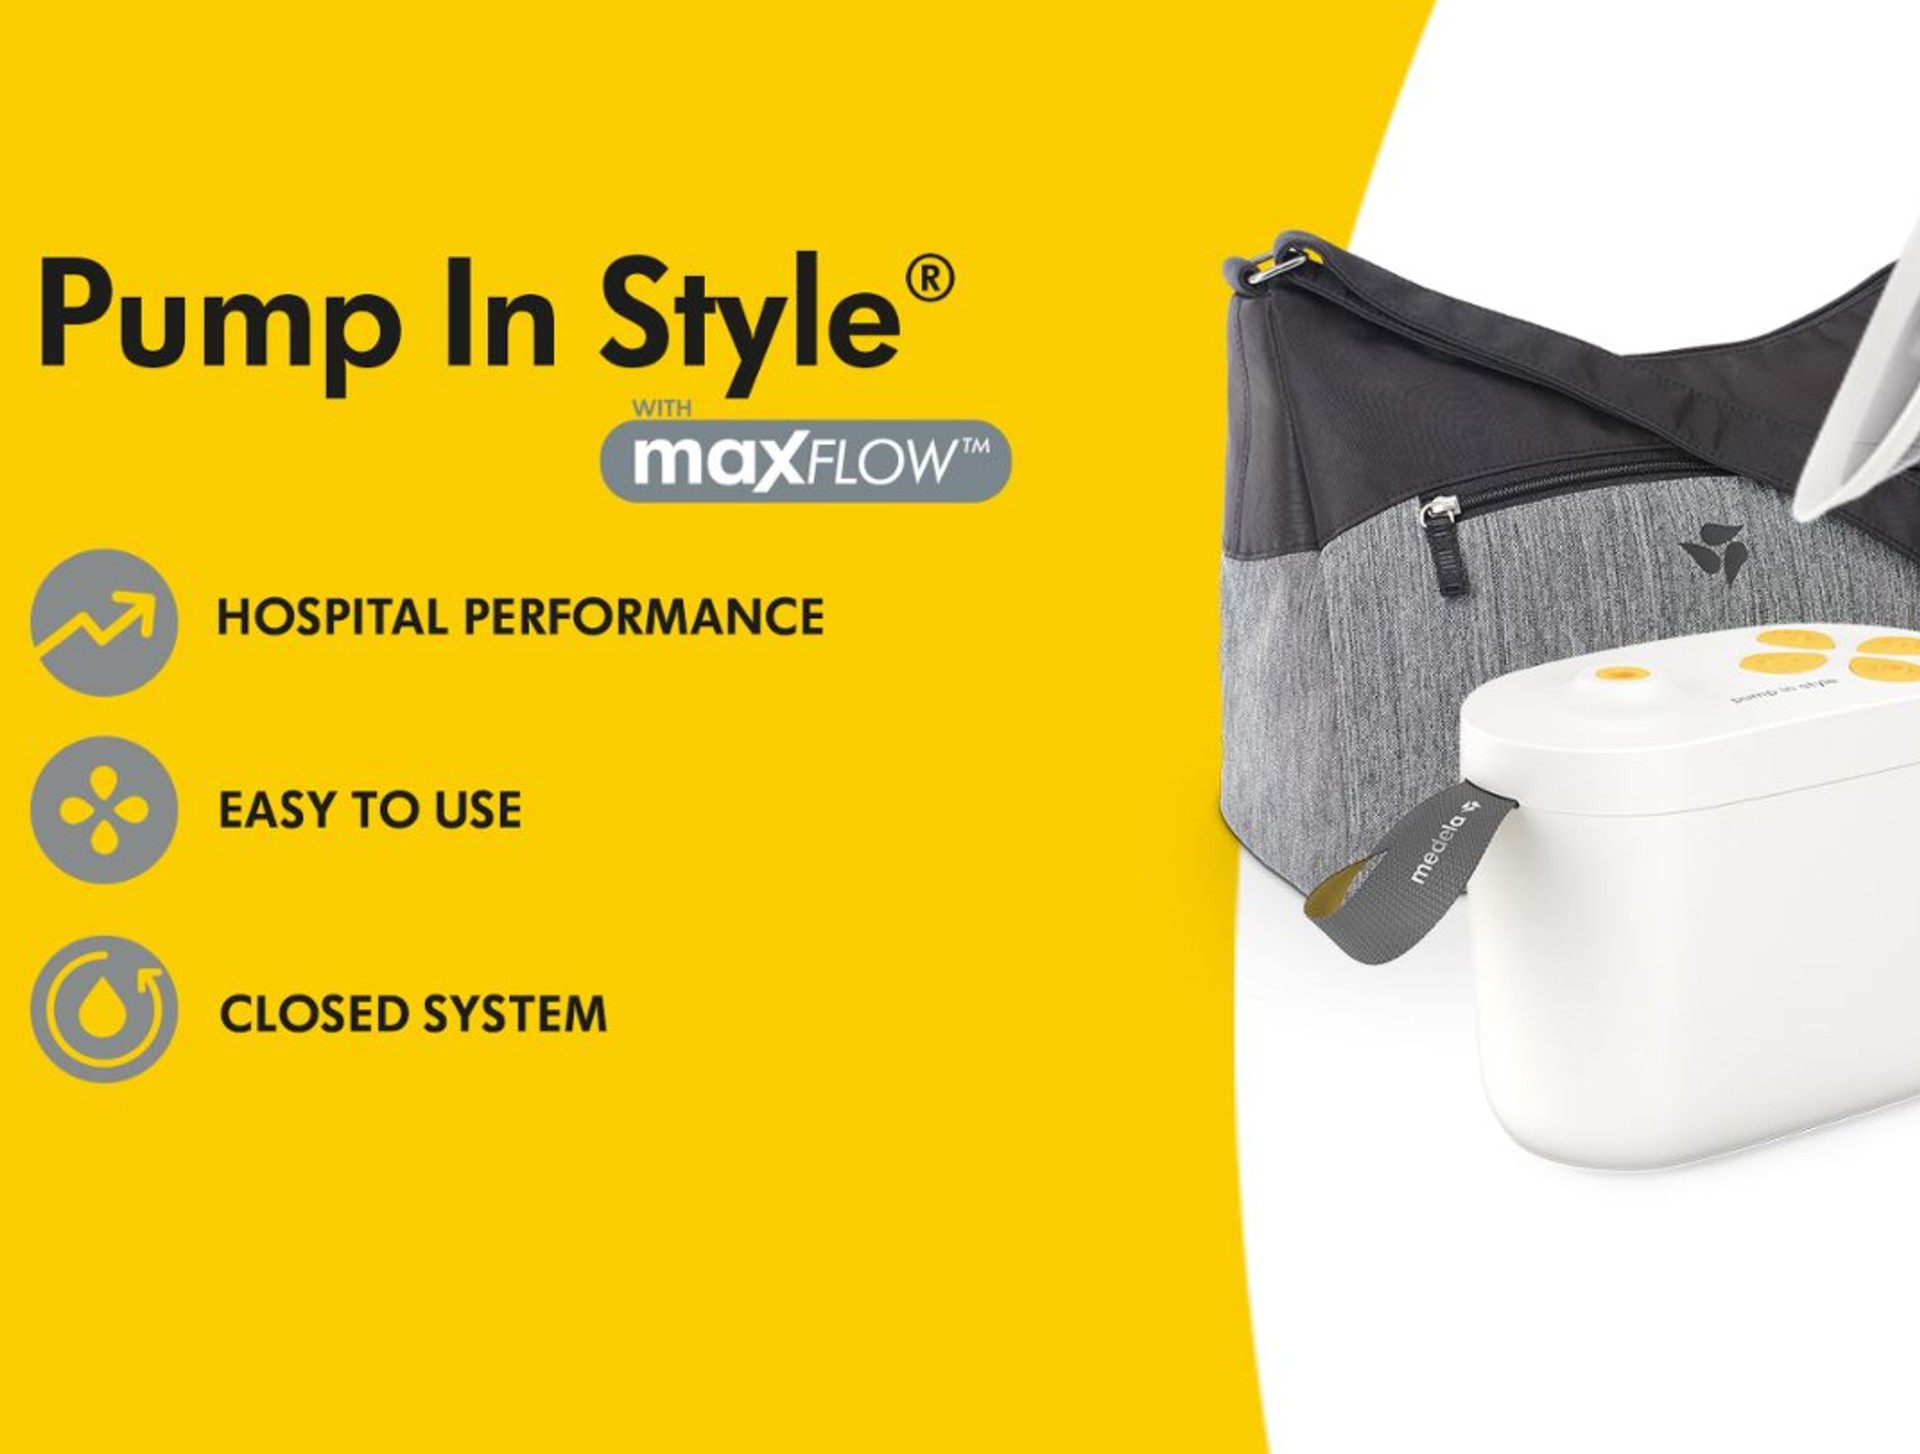 The New Pump In Style® with MaxFlow™ - Designed to Deliver More